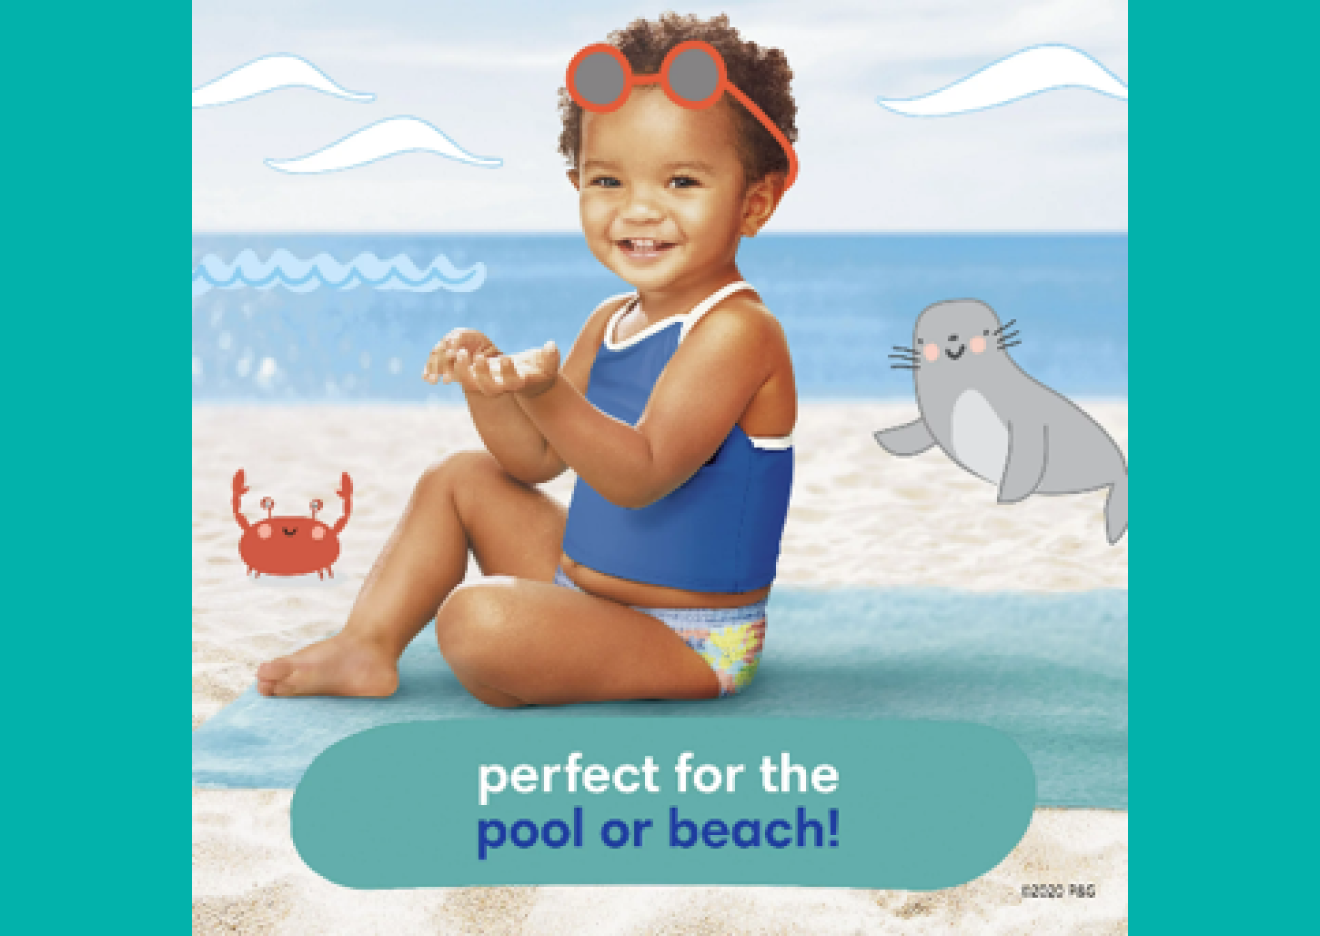 Pampers Splashers are perfect for the pool or beach